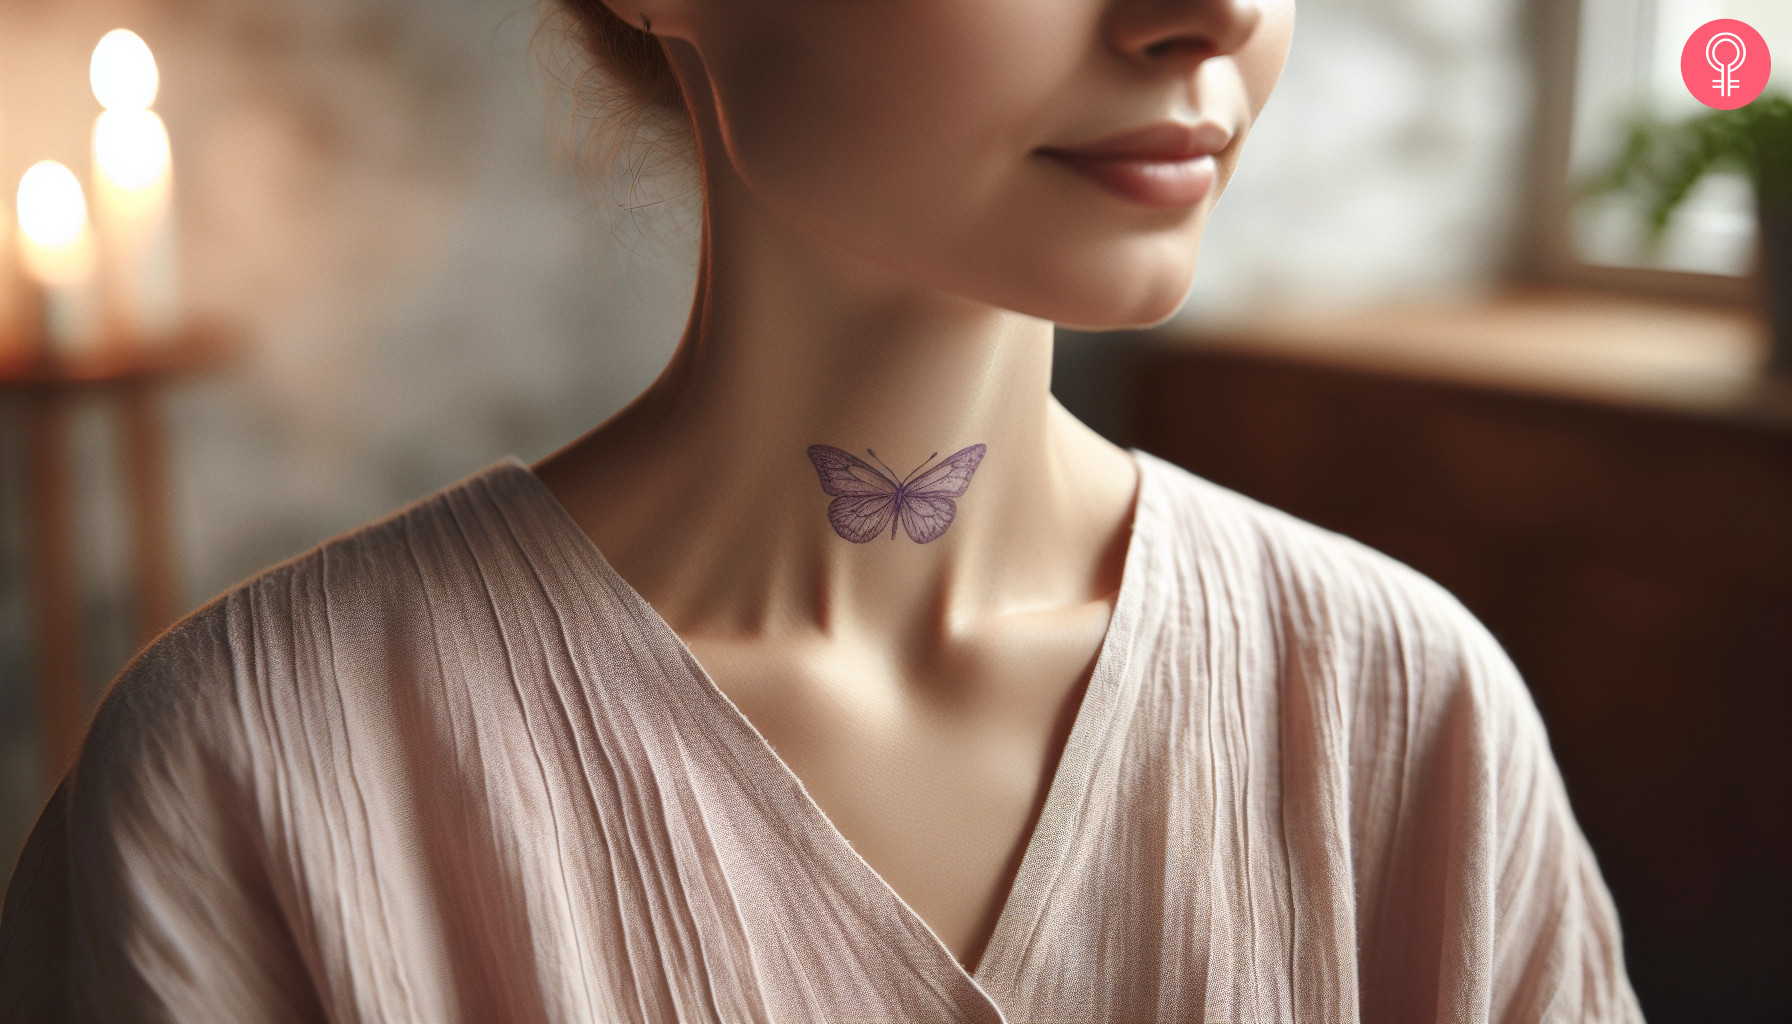 A purple butterfly tattoo on a woman’s neck